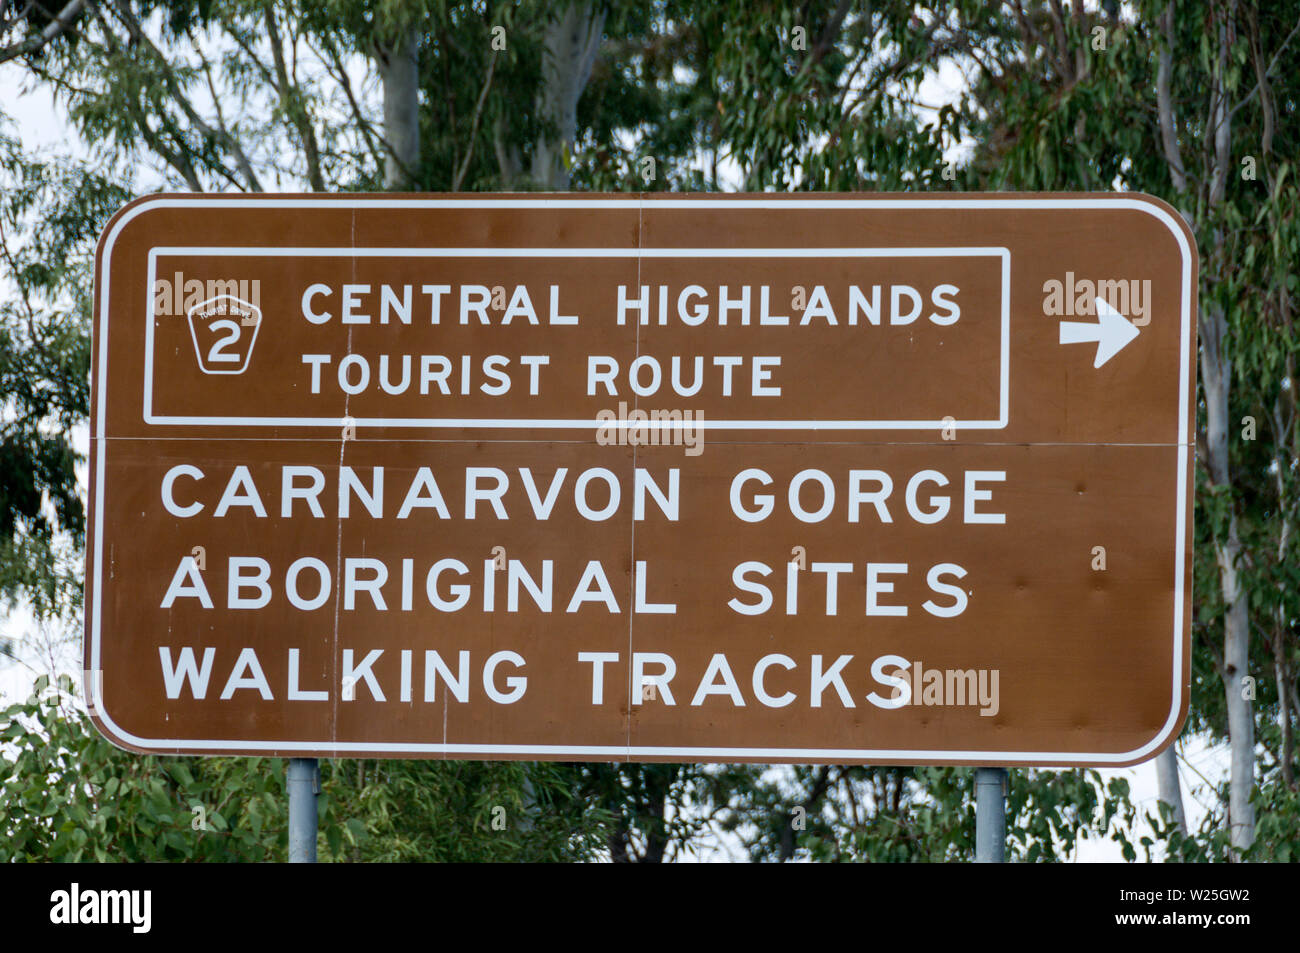 A tourist road sign in the Carnarvon National Park in the Central Highlands of Queensland in Australia. Stock Photo